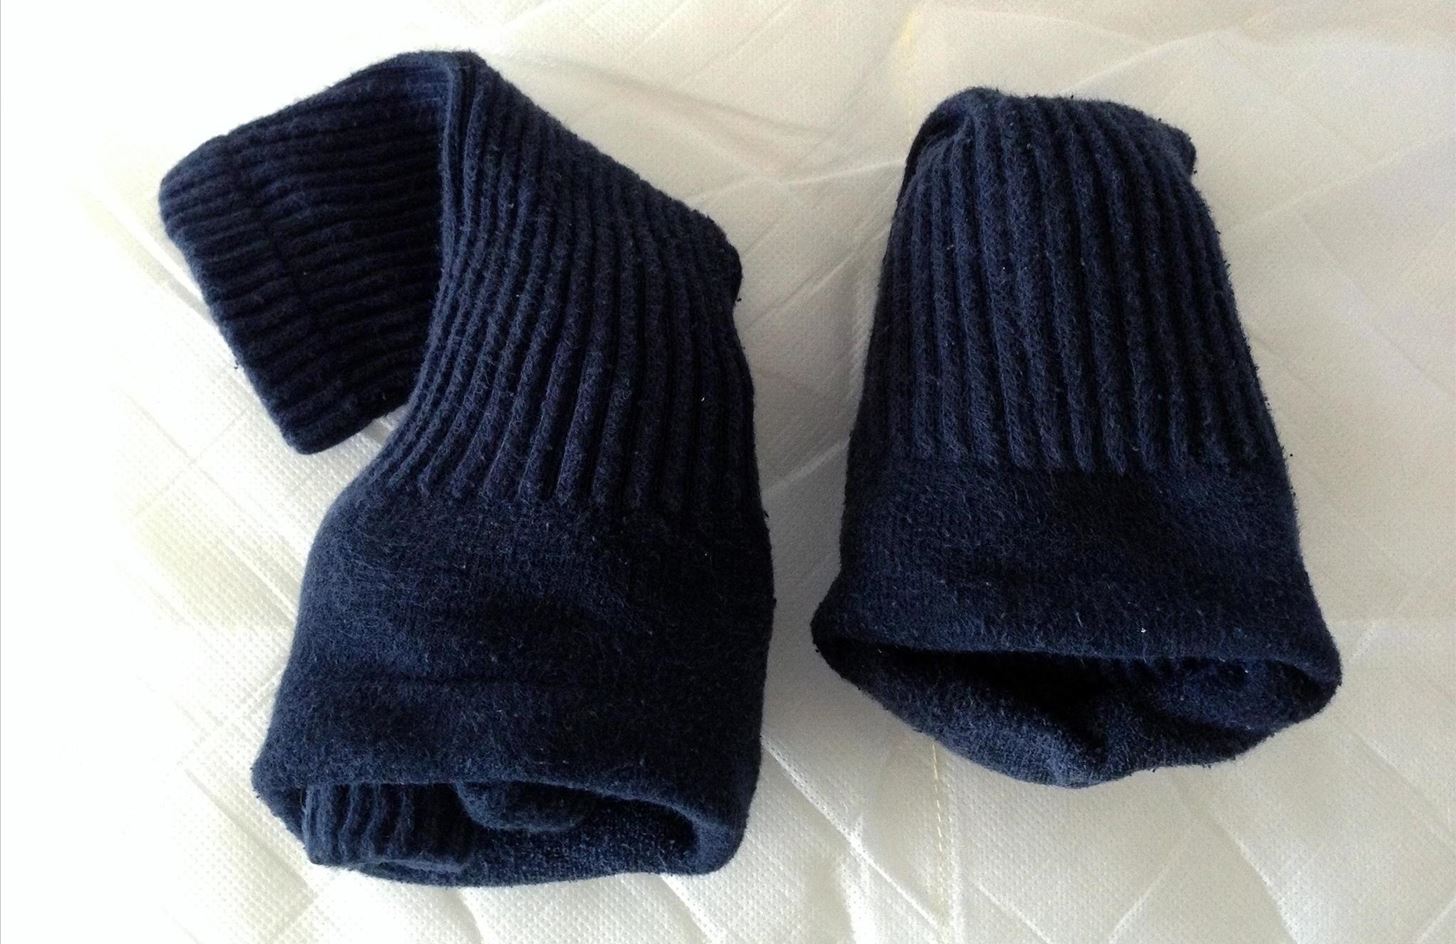 How You Should Really “Fold” Socks to Prevent Stretching Them Out